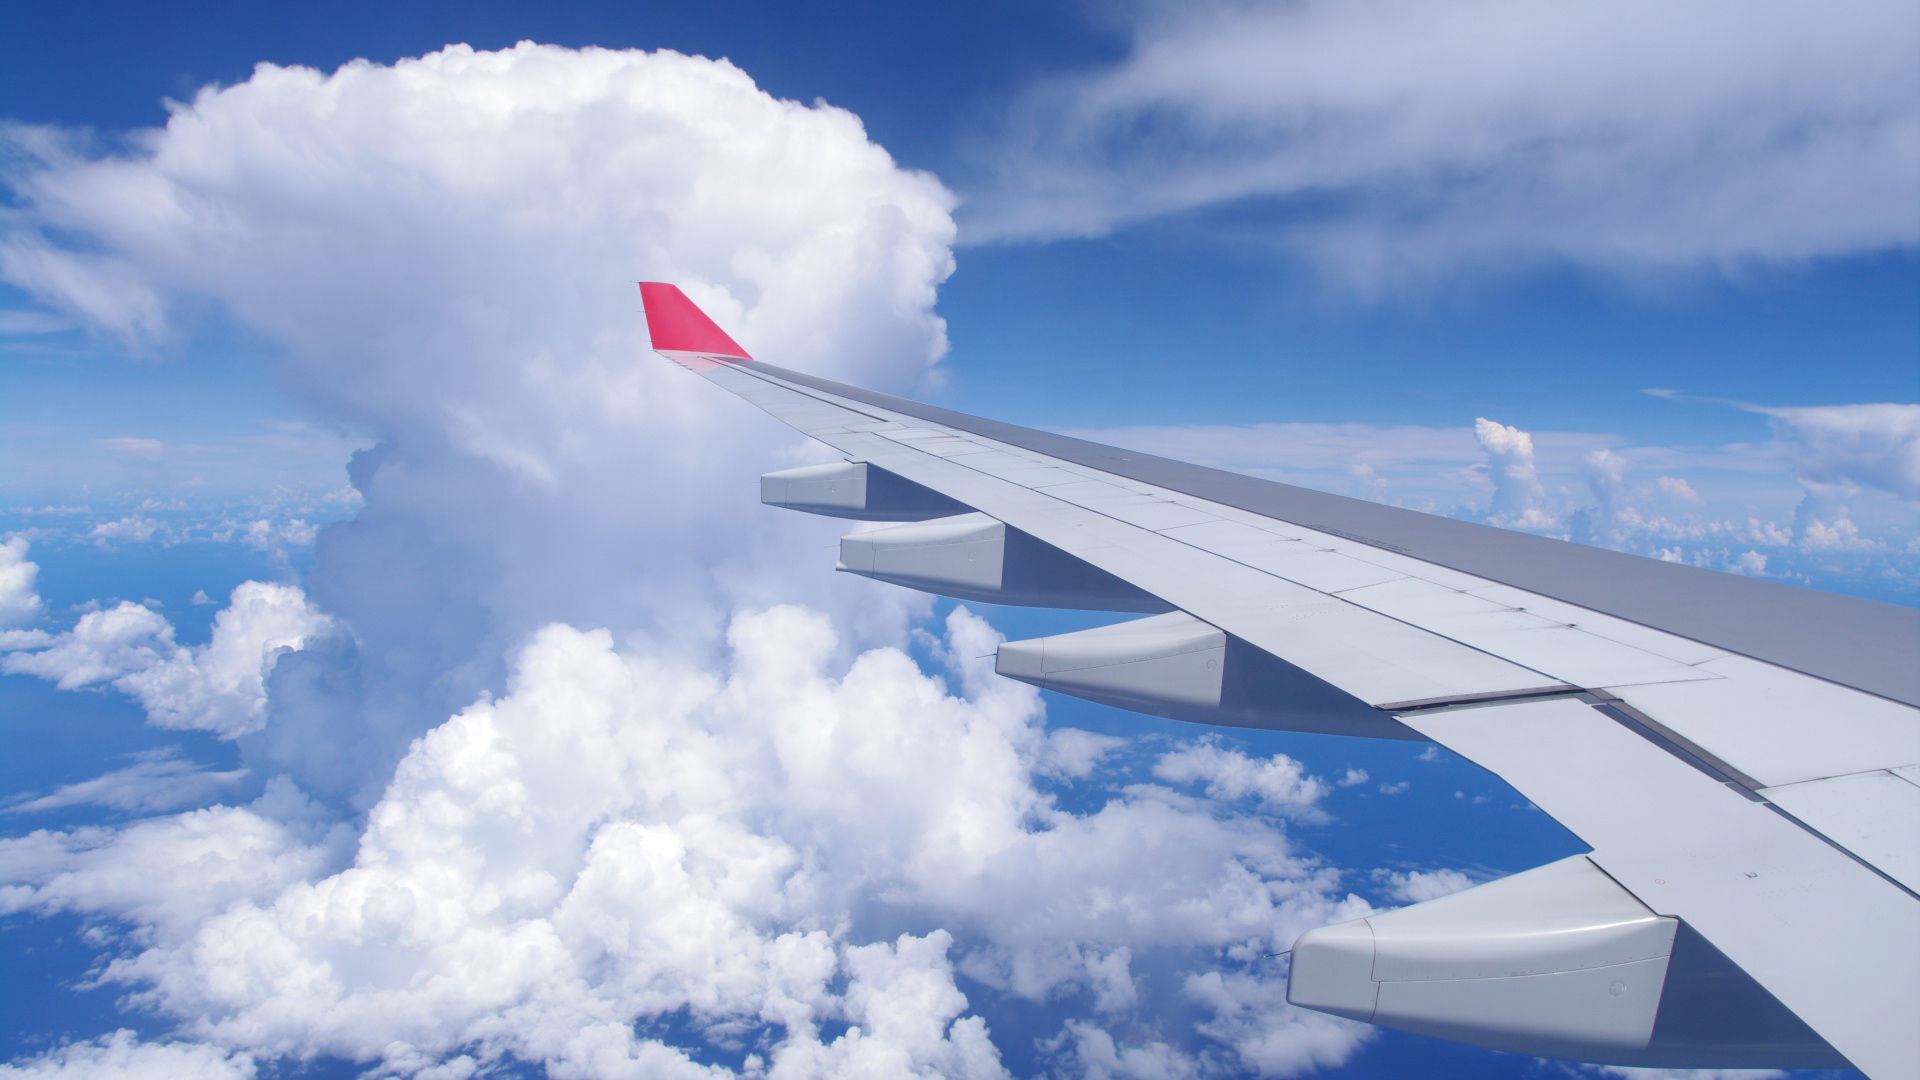 White and Red Airplane Wing Under Blue Sky and White Clouds During Daytime. Wallpaper in 1920x1080 Resolution